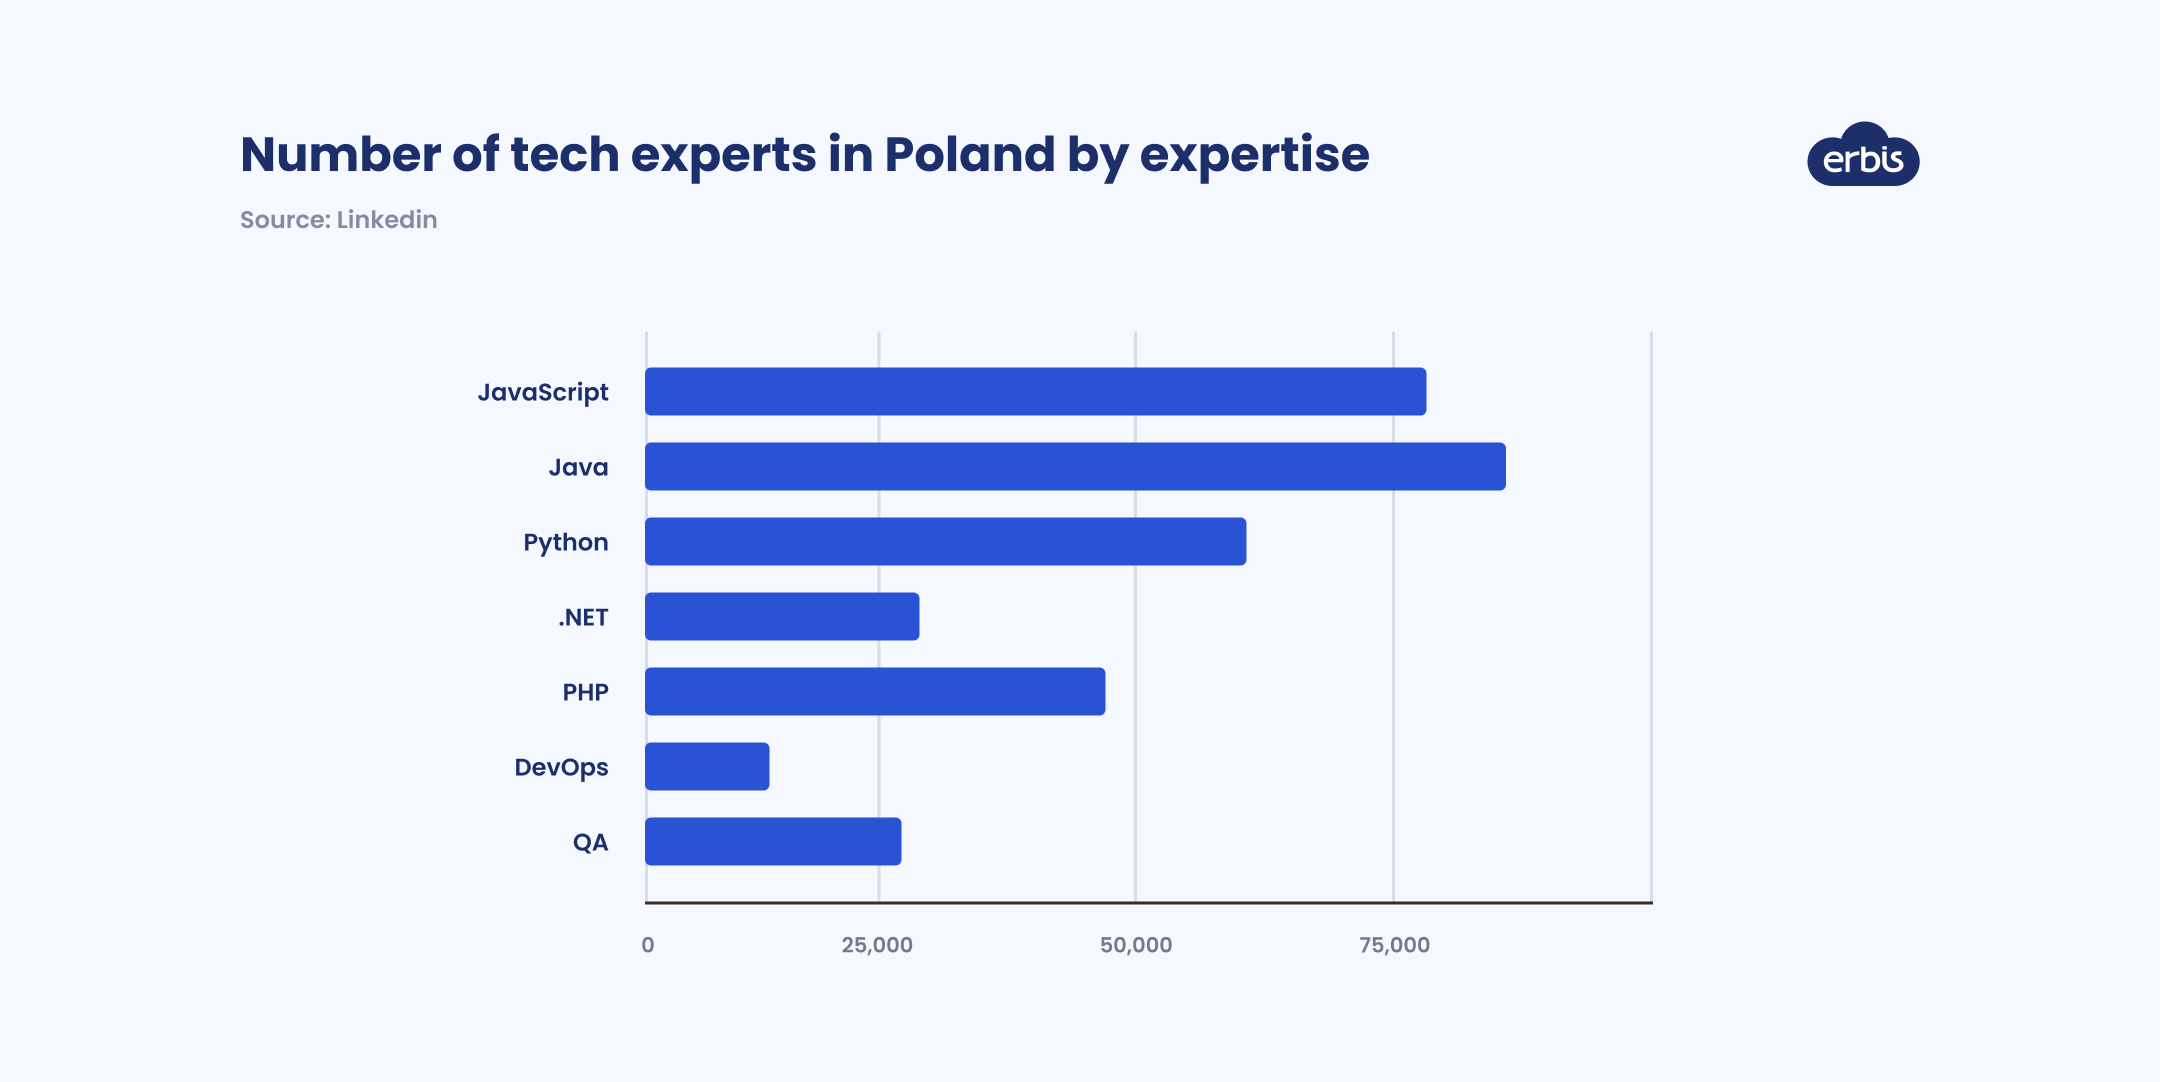 Number of tech experts in Poland